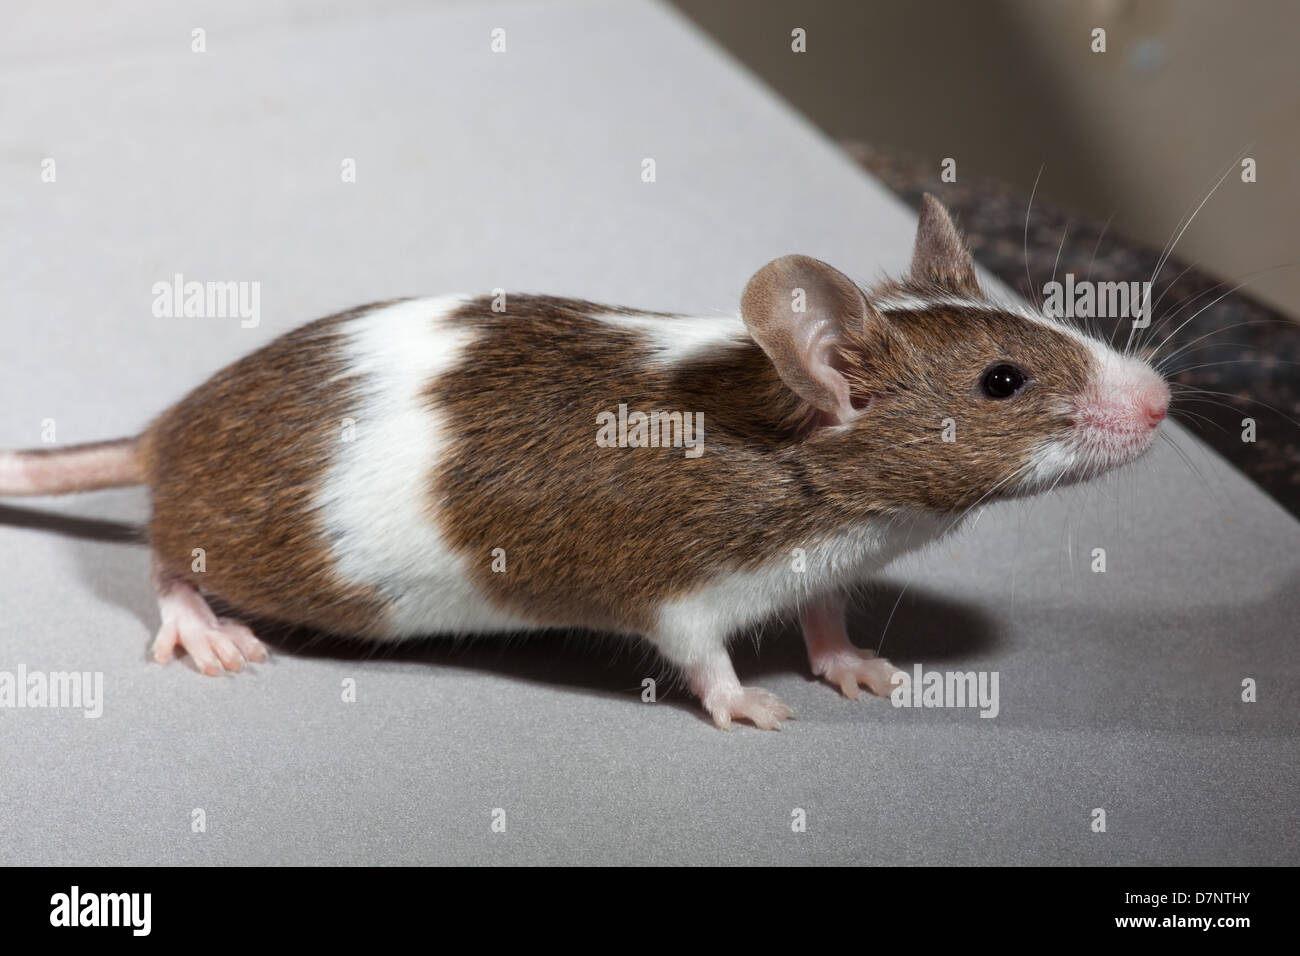 Tame Pet Mouse. (Mus musculus). Skewbald, or brown and white, colour form. Stock Photo